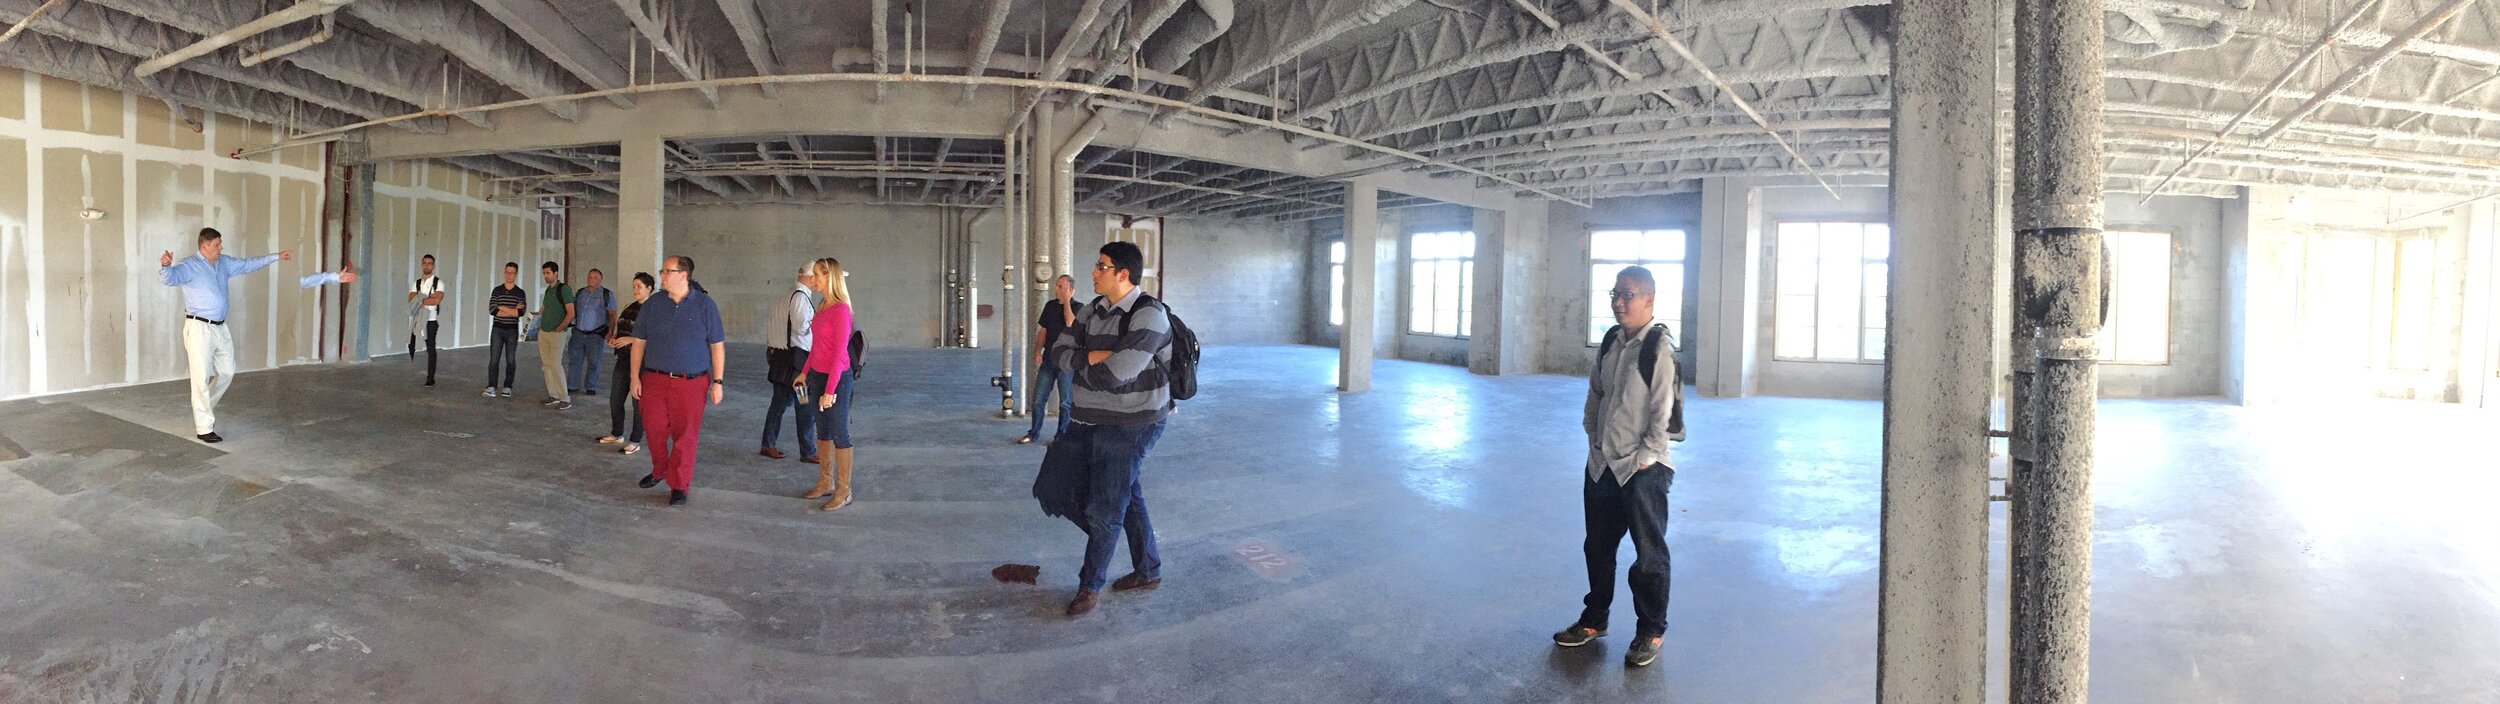 Exploring the shell of the new Sighthound office.  Winter Park, Florida.  2015.